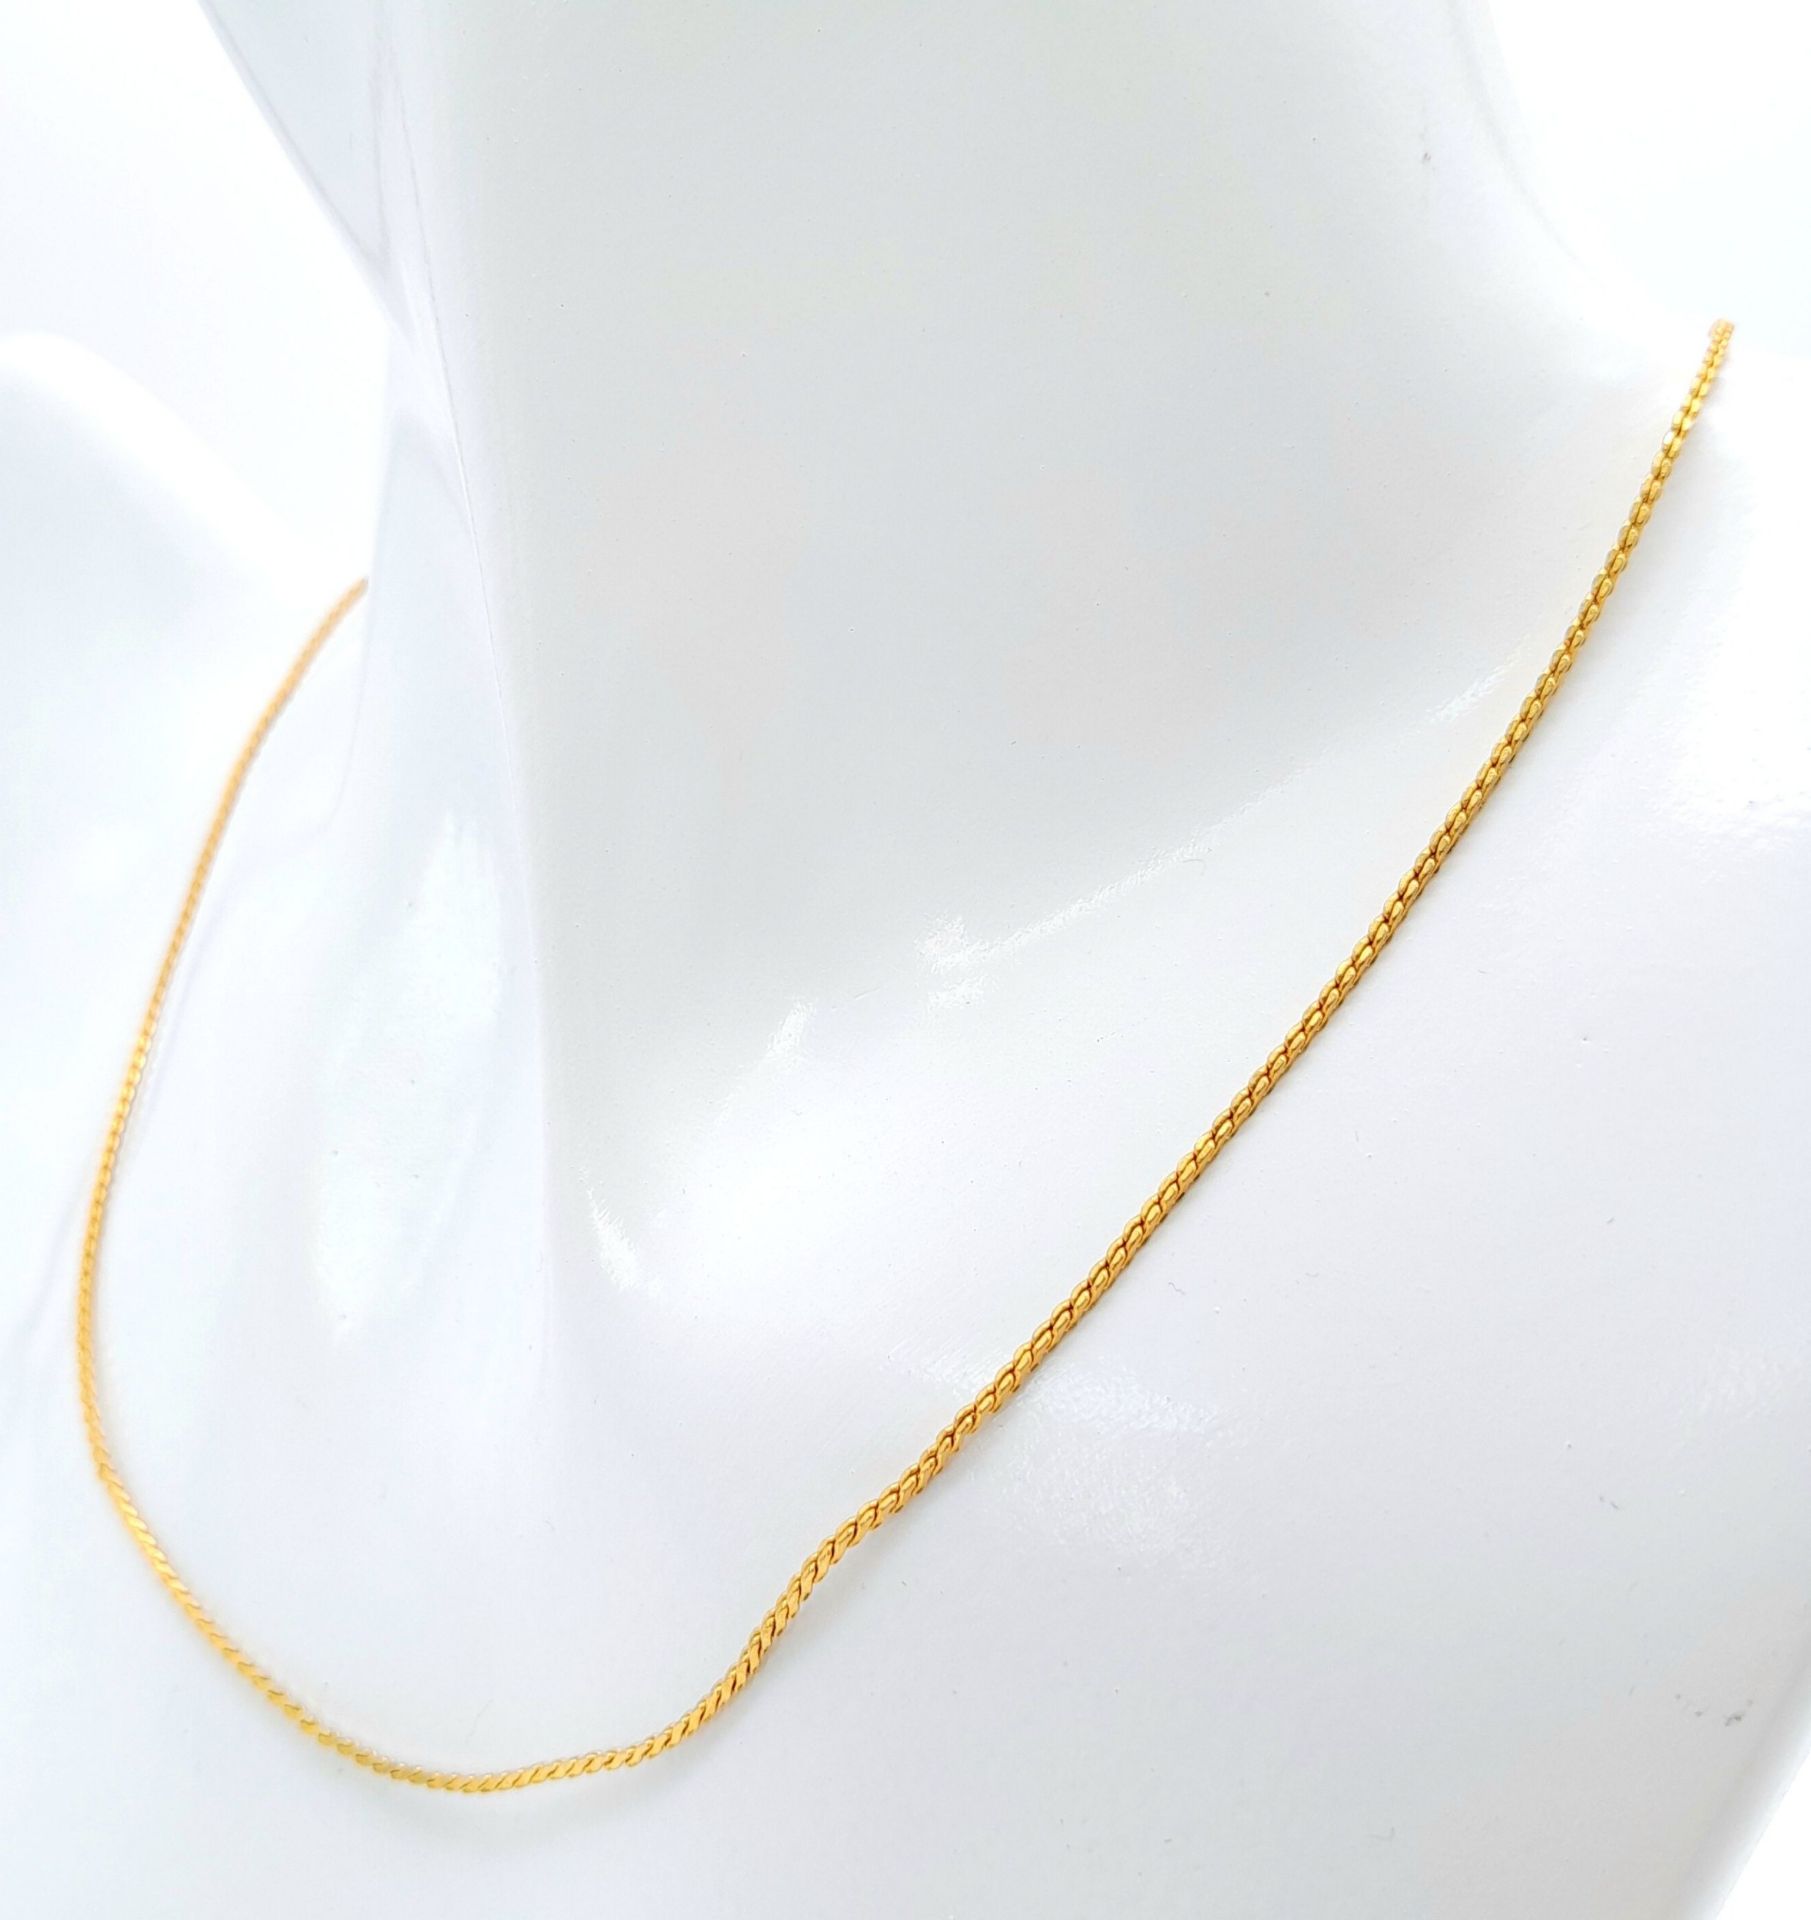 A 9 k yellow gold chain necklace, length: 37 cm, weight: 2.3 g. - Image 4 of 4